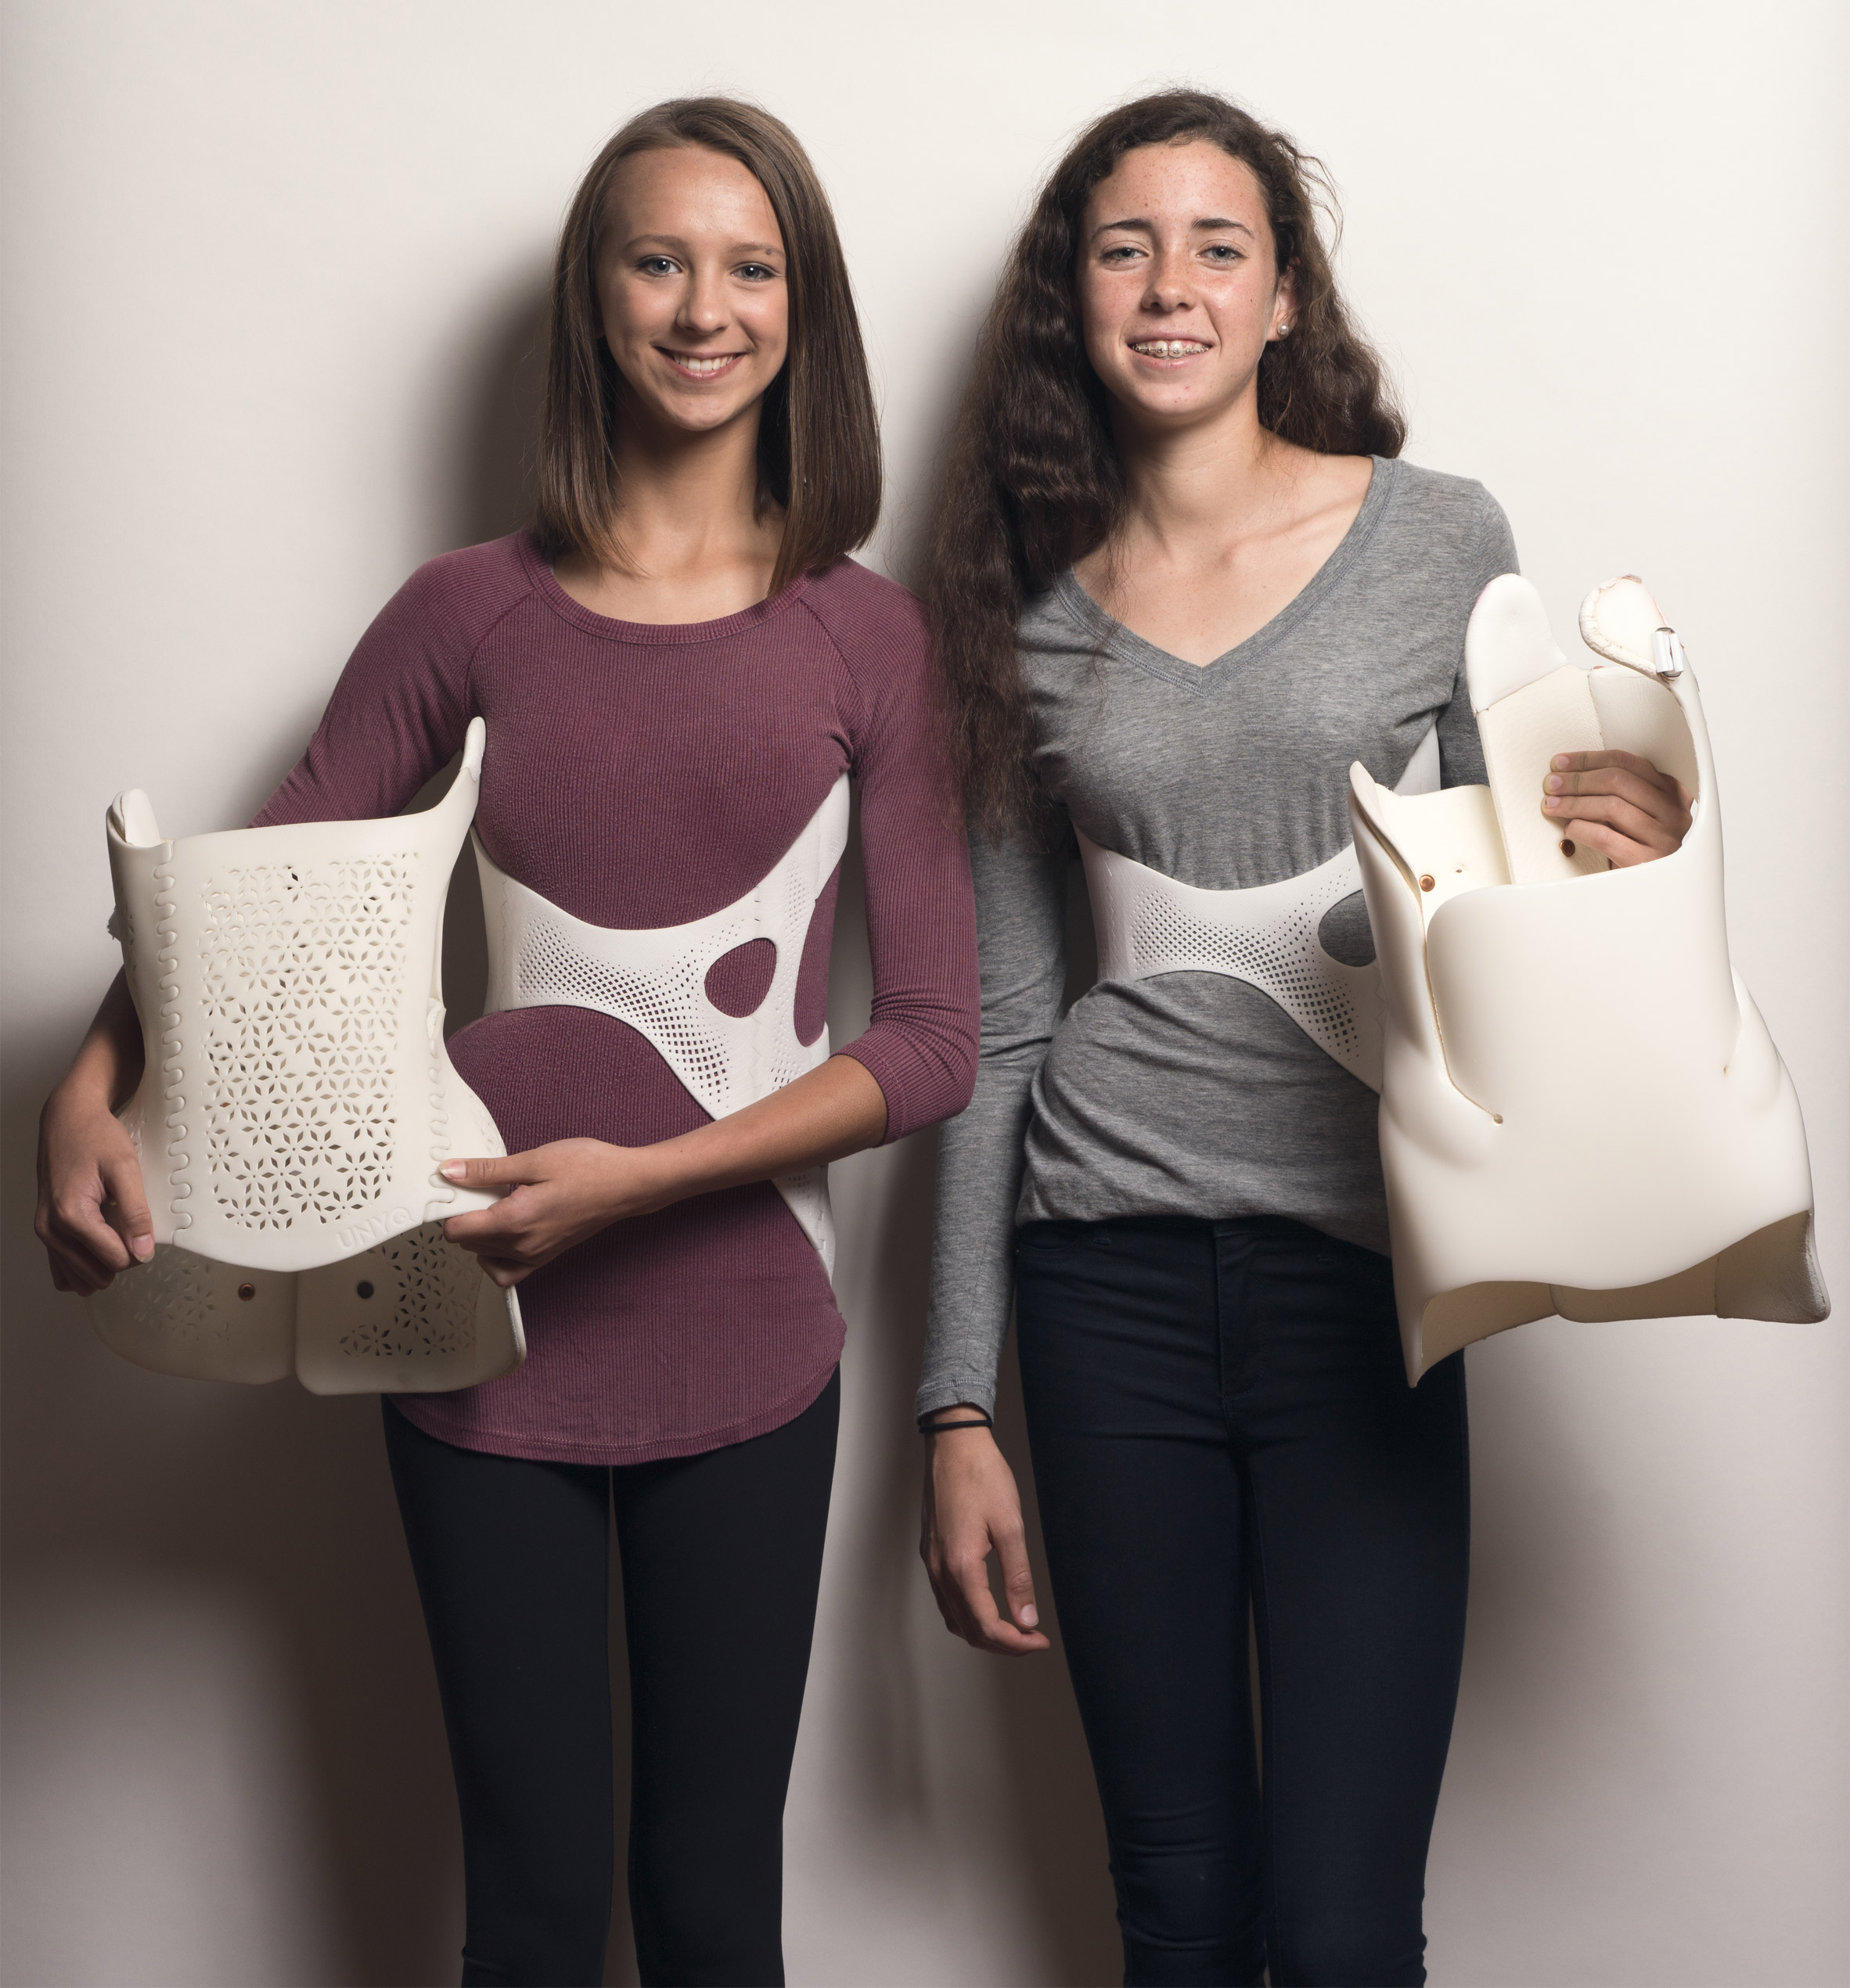 3D-printed back brace offers fashionable solution for scoliosis sufferers